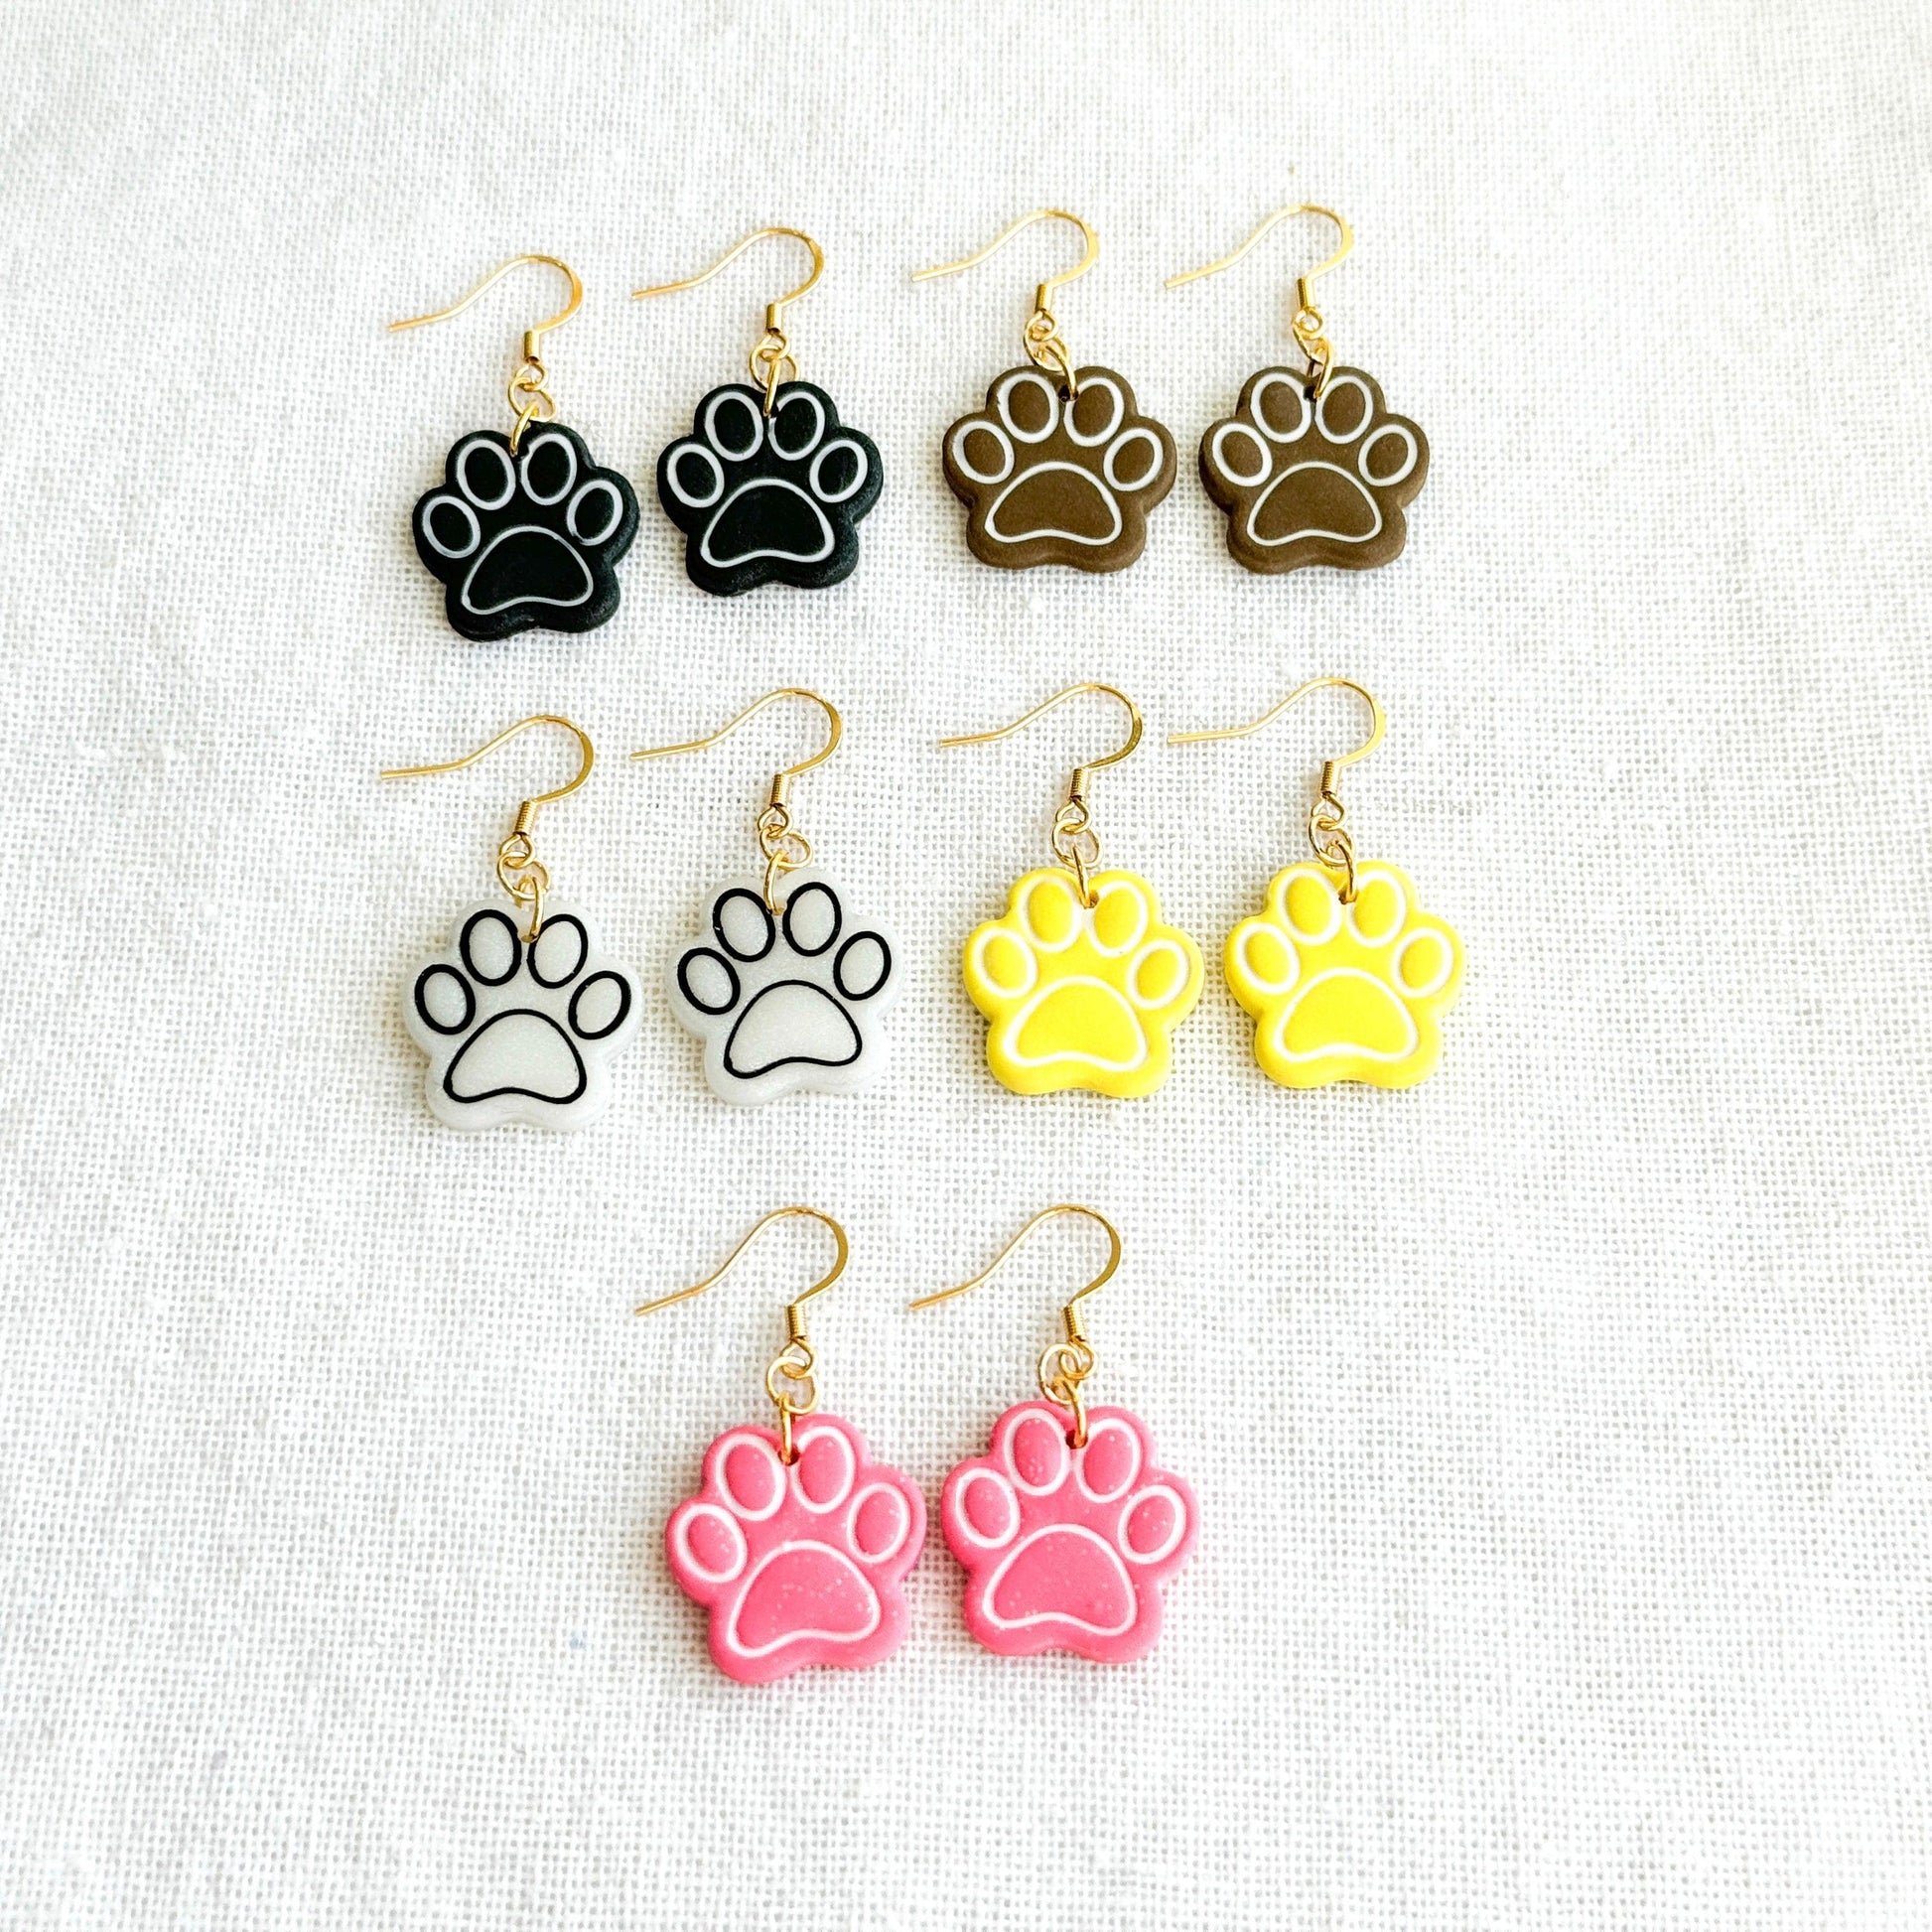 Paw Print Earrings, Multiple Colors - Harbor to Gulf Co.